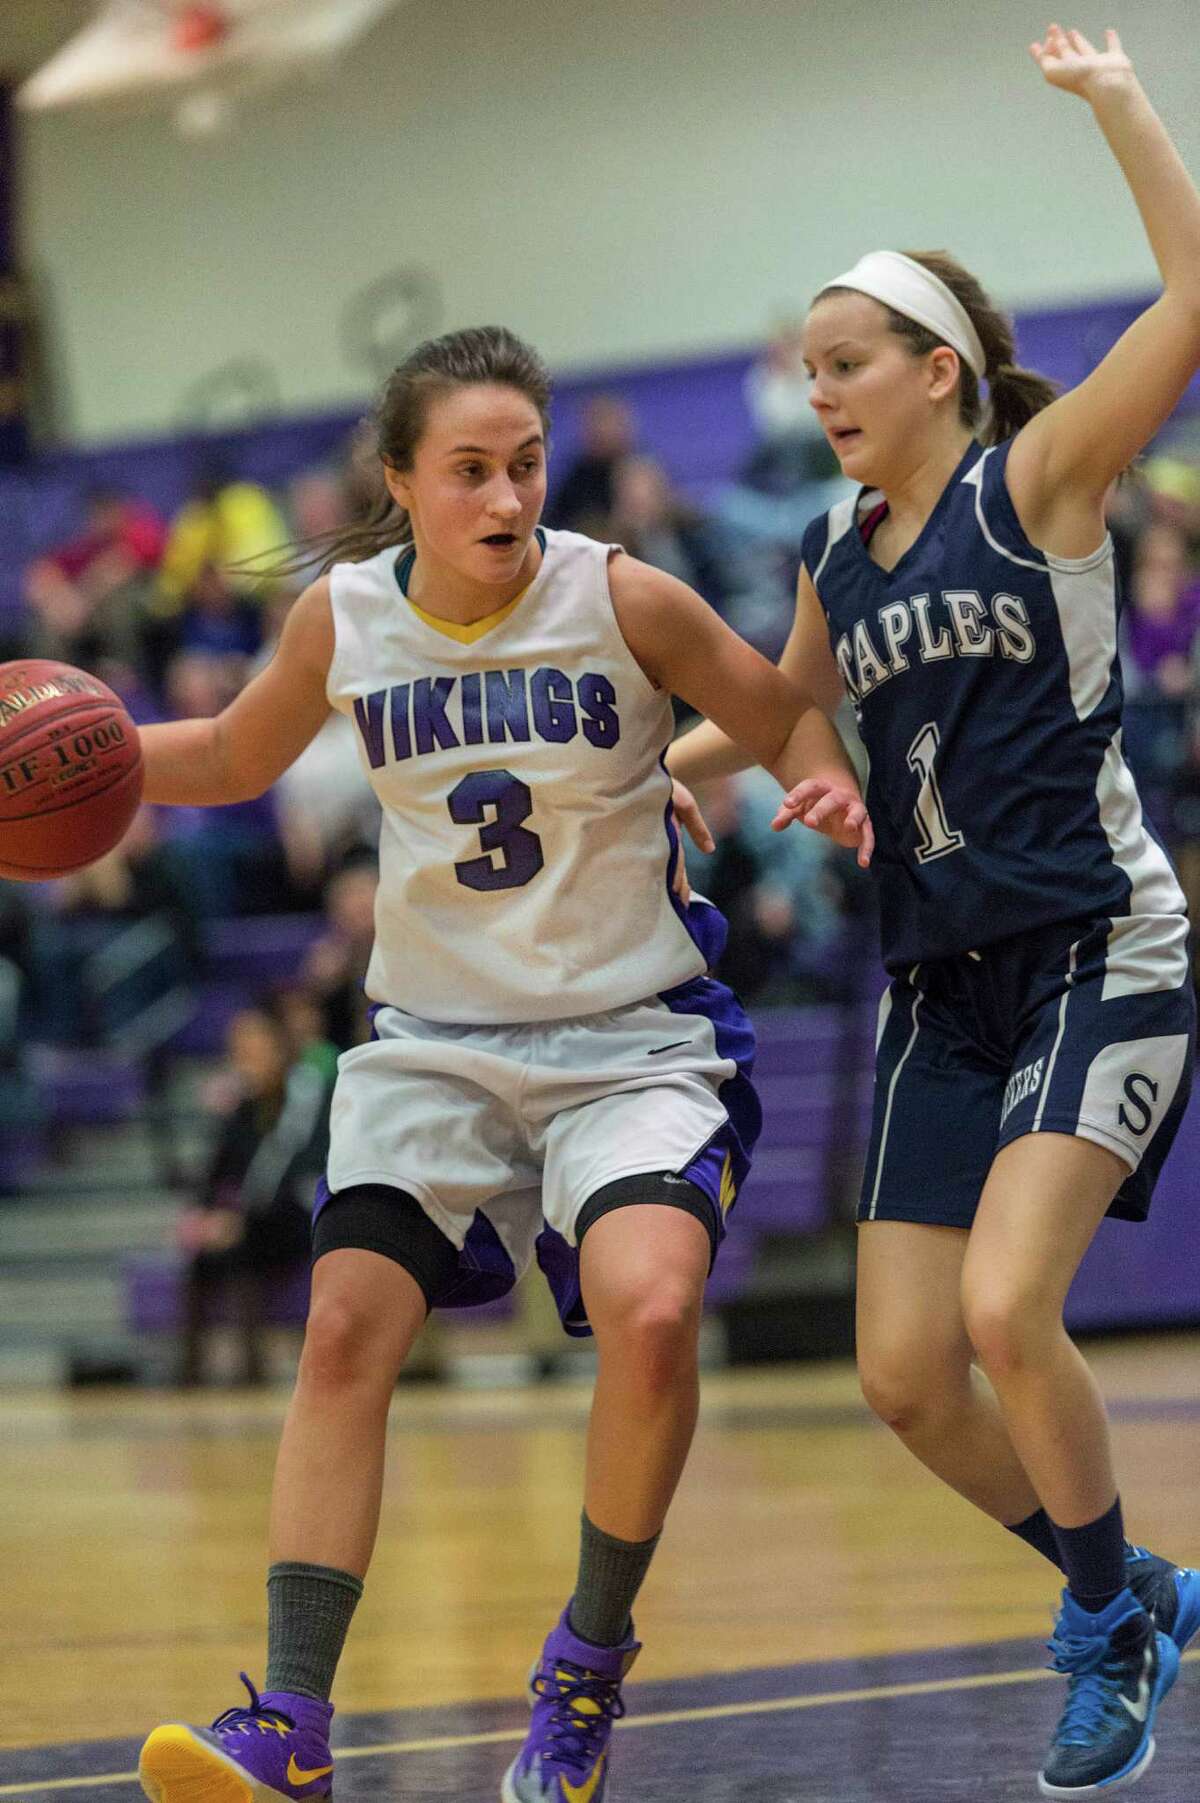 Westhill High School's Edona Thaqi drives toward the basket as Staples High School's Rachel Seideman tries to stop her during a girls basketball game against played at Westhill High School Stamford, CT on Friday, December 12th, 2014